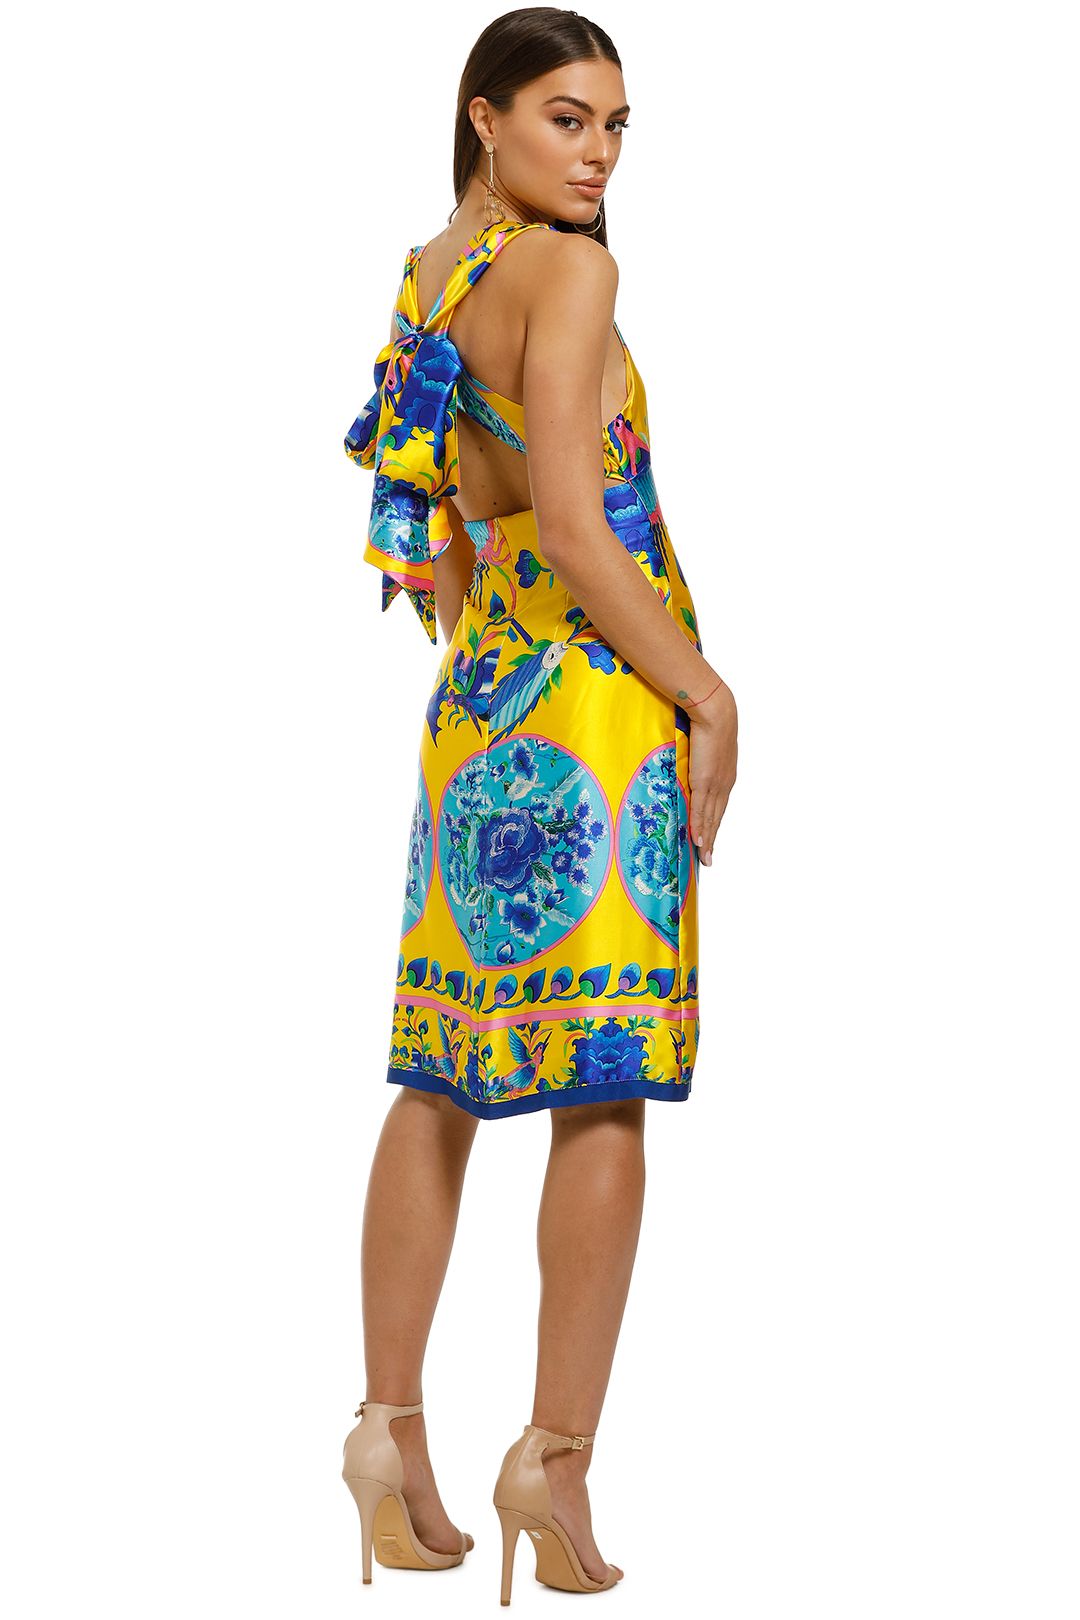 Cooper-by-Trelise-Cooper-Burning-Bright-Dress-Yellow-Print-Back